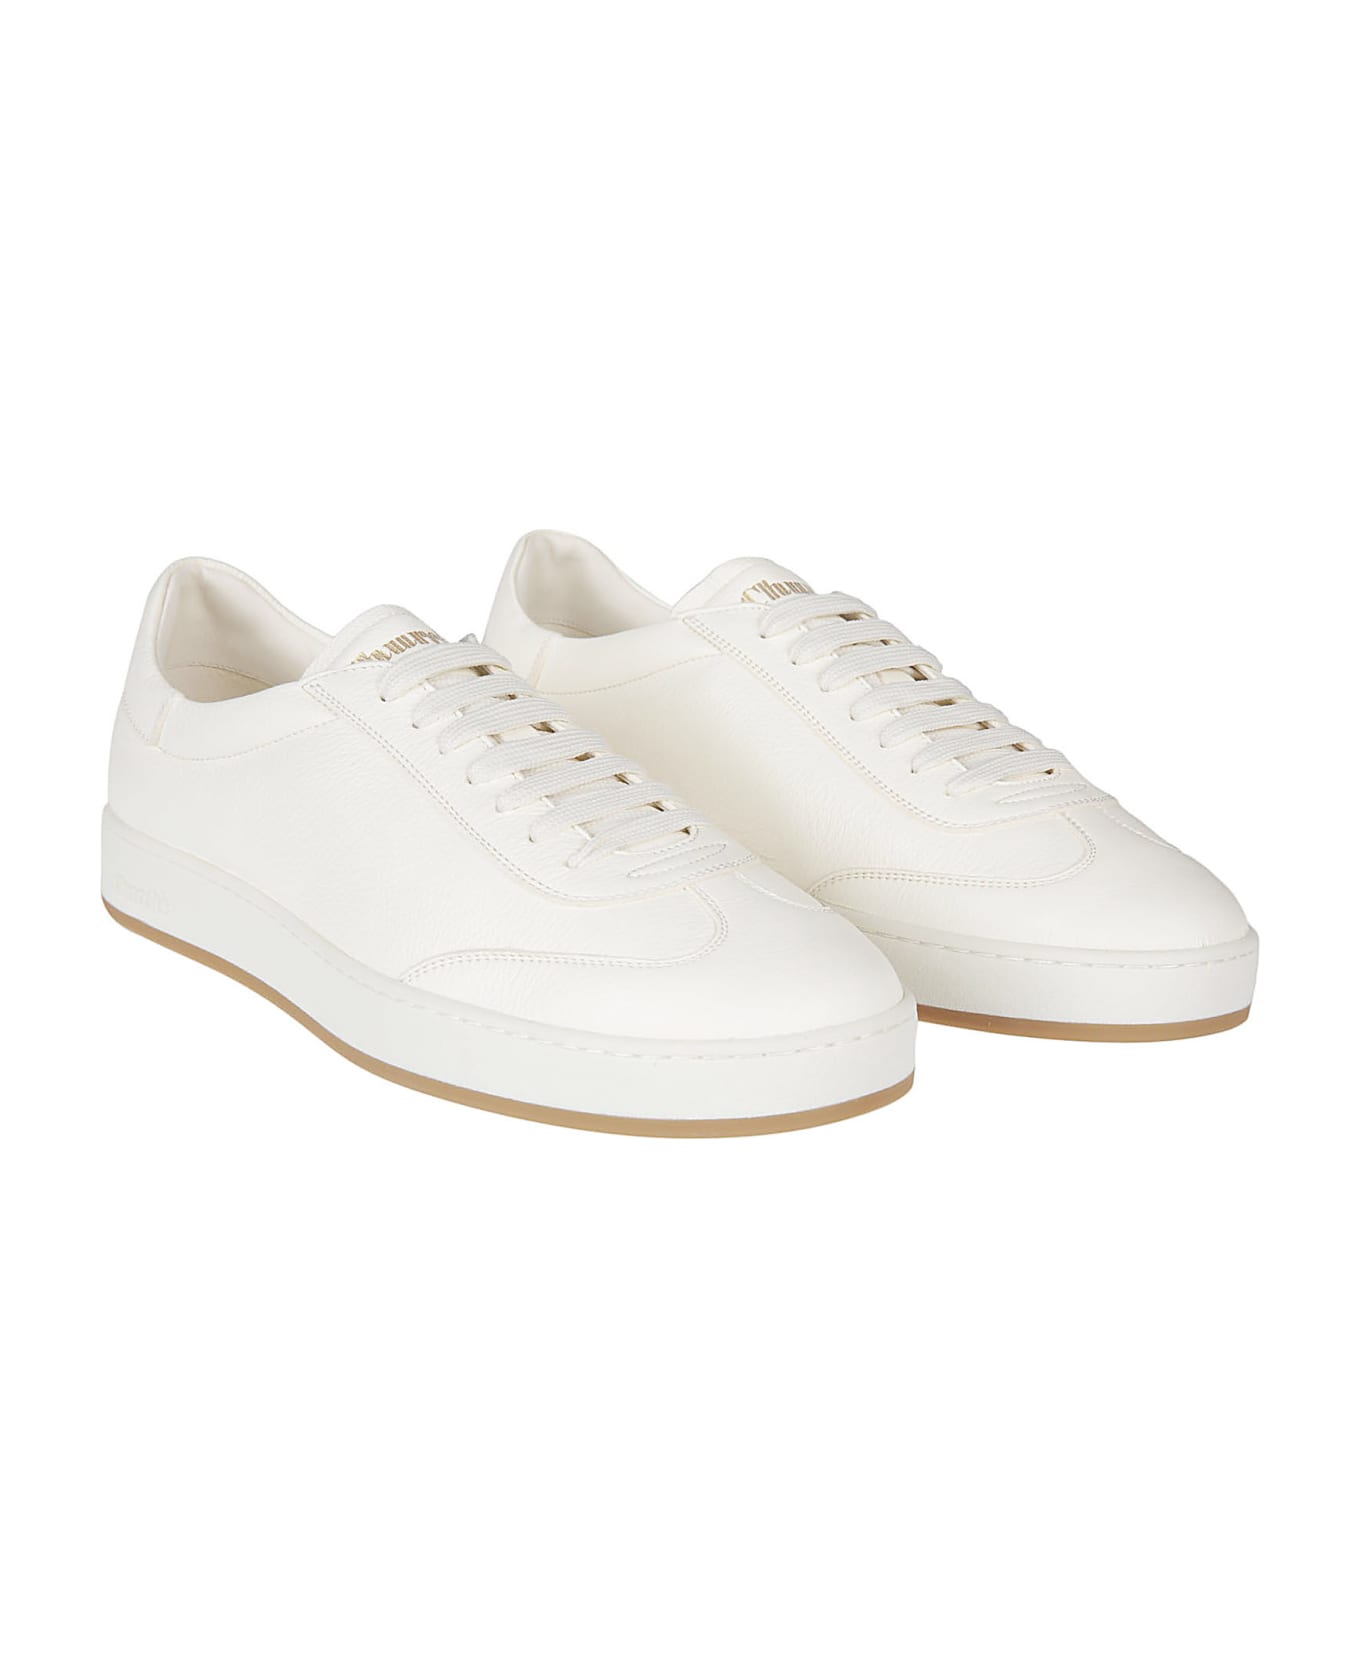 Church's Largs 2 Sneakers - All Ivory スニーカー